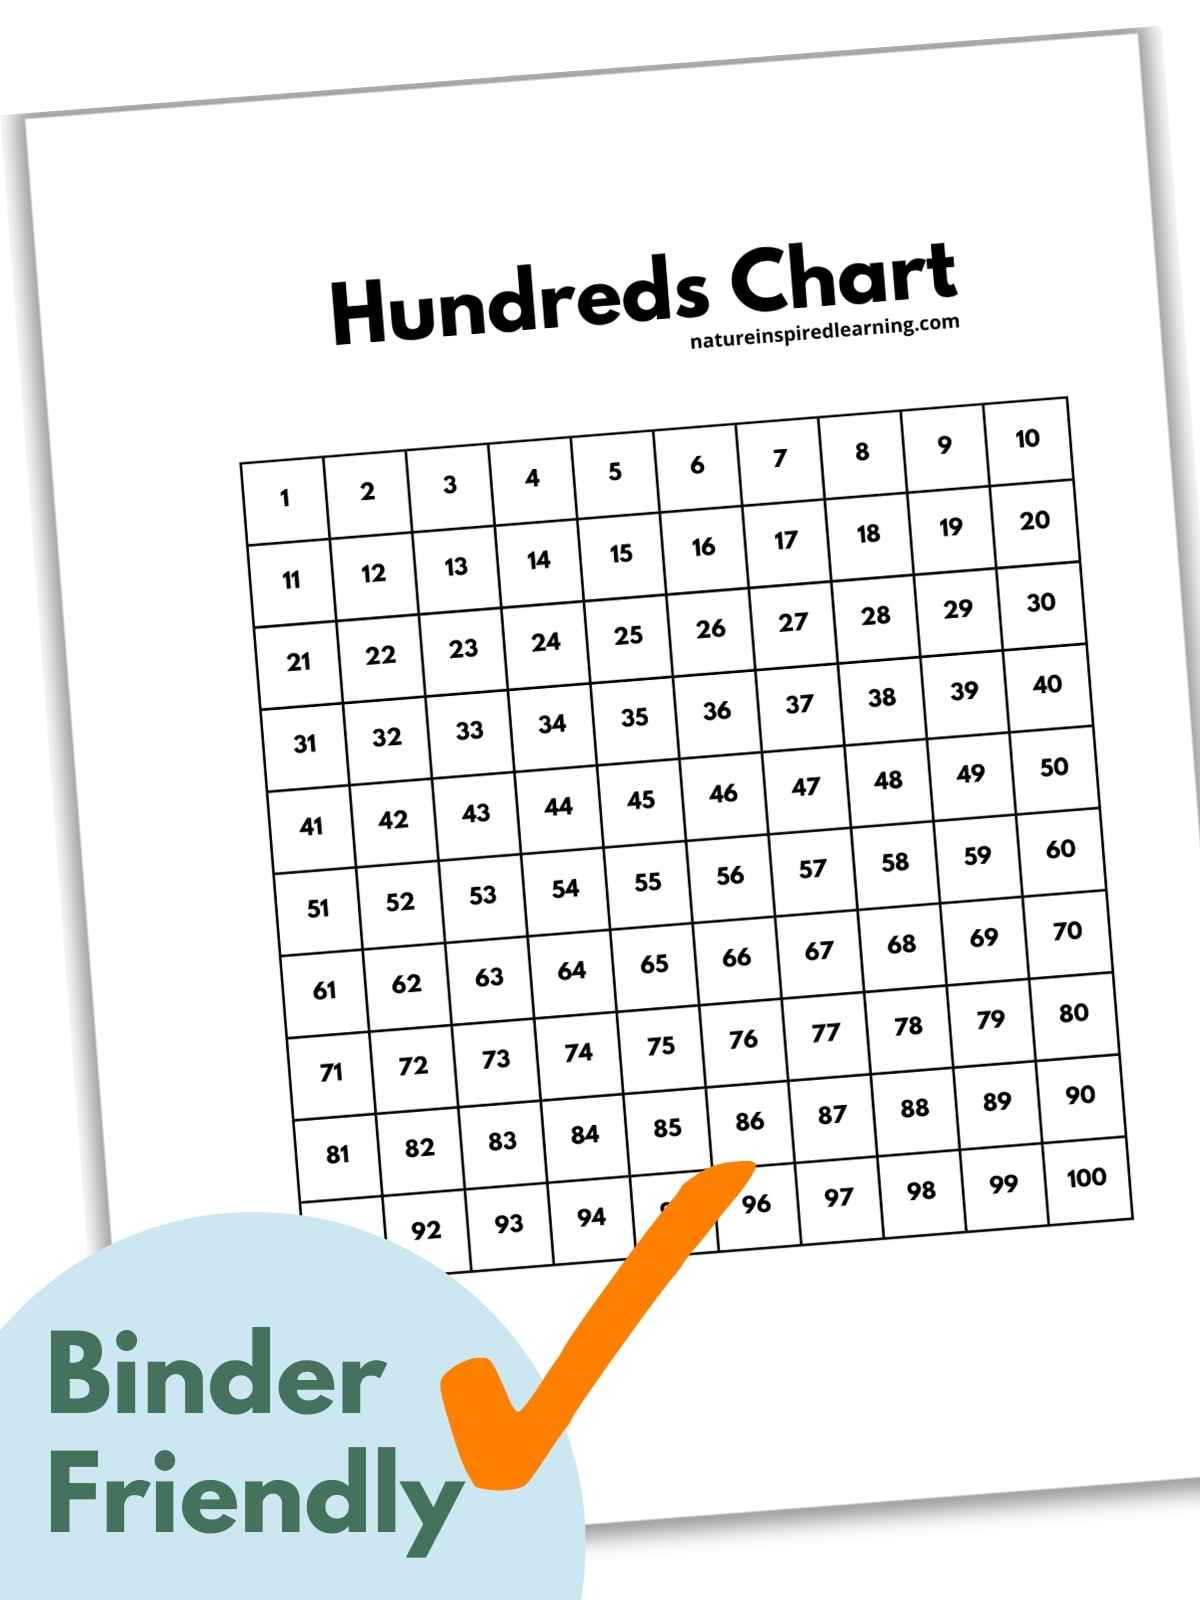 black and white hundreds chart with a title across the top of the sheet. Printable slanted with a light blue circle on top of the sheet with text overlay and an orange check mark bottom left corner.